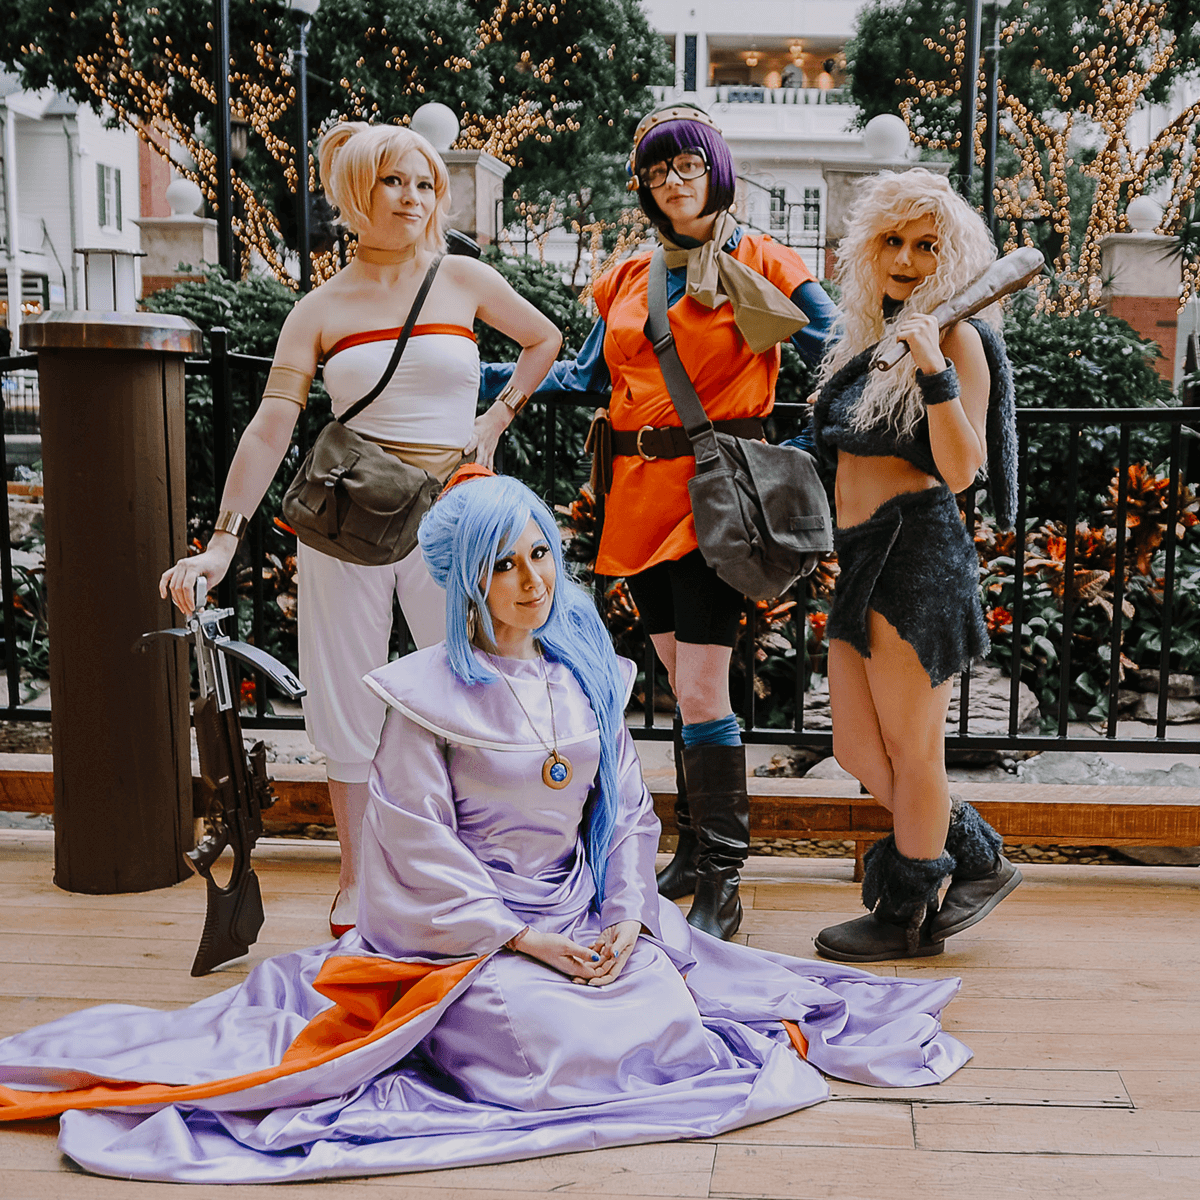 Happy anniversary to my favorite game of all time: Chrono Trigger 🧡 Ayla is me Lucca is @GrumpsterKitty Schala is @trickssi Marle is @feytaline 📸 @MadsterPhoto #ChronoTrigger #ChronoTrigger27th #クロノ・トリガー #クロノトリガー #クロノトリガー27周年